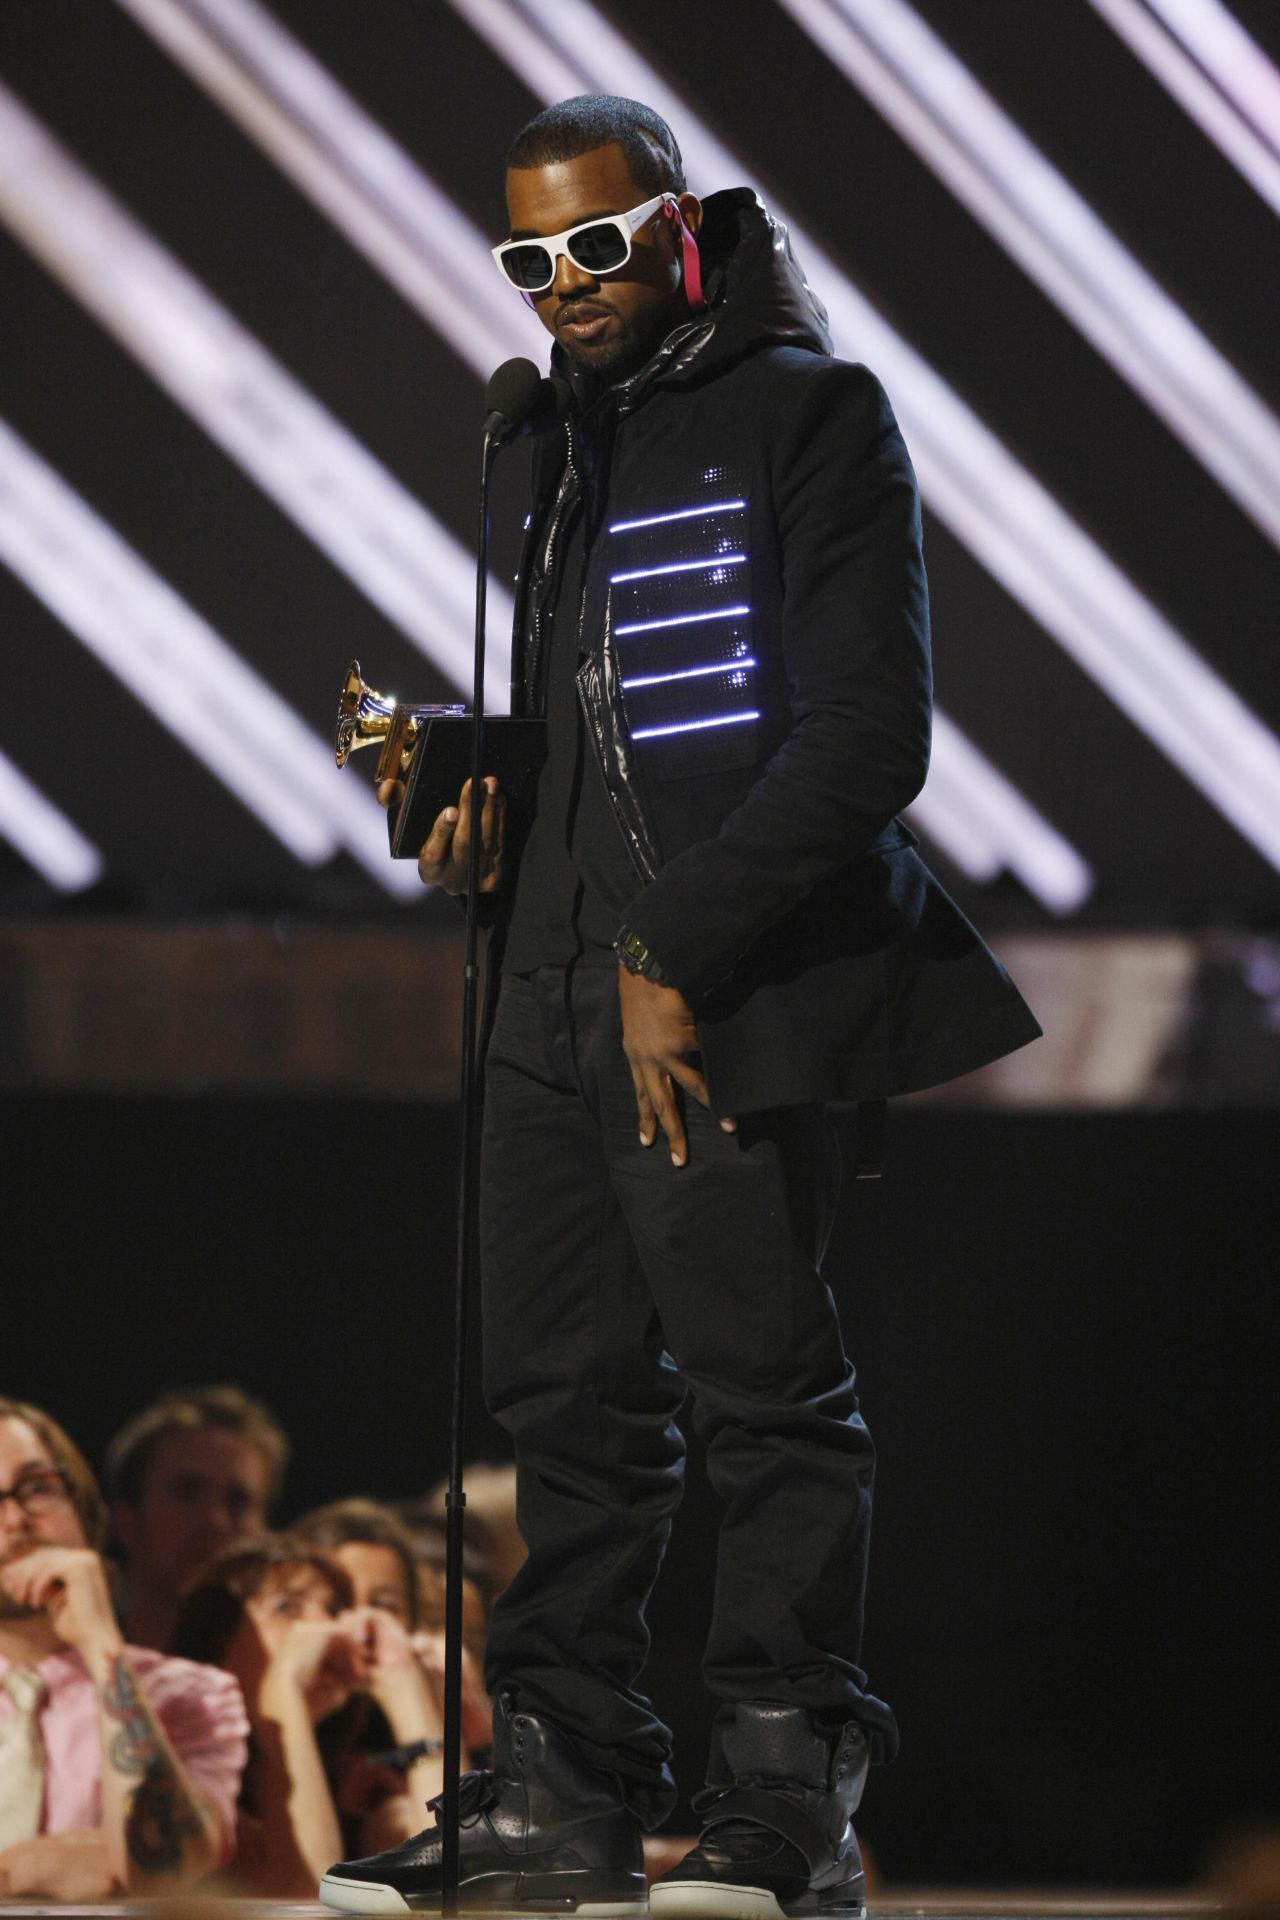 Kanye West scooped four Grammys on the night, including Best Rap Album.